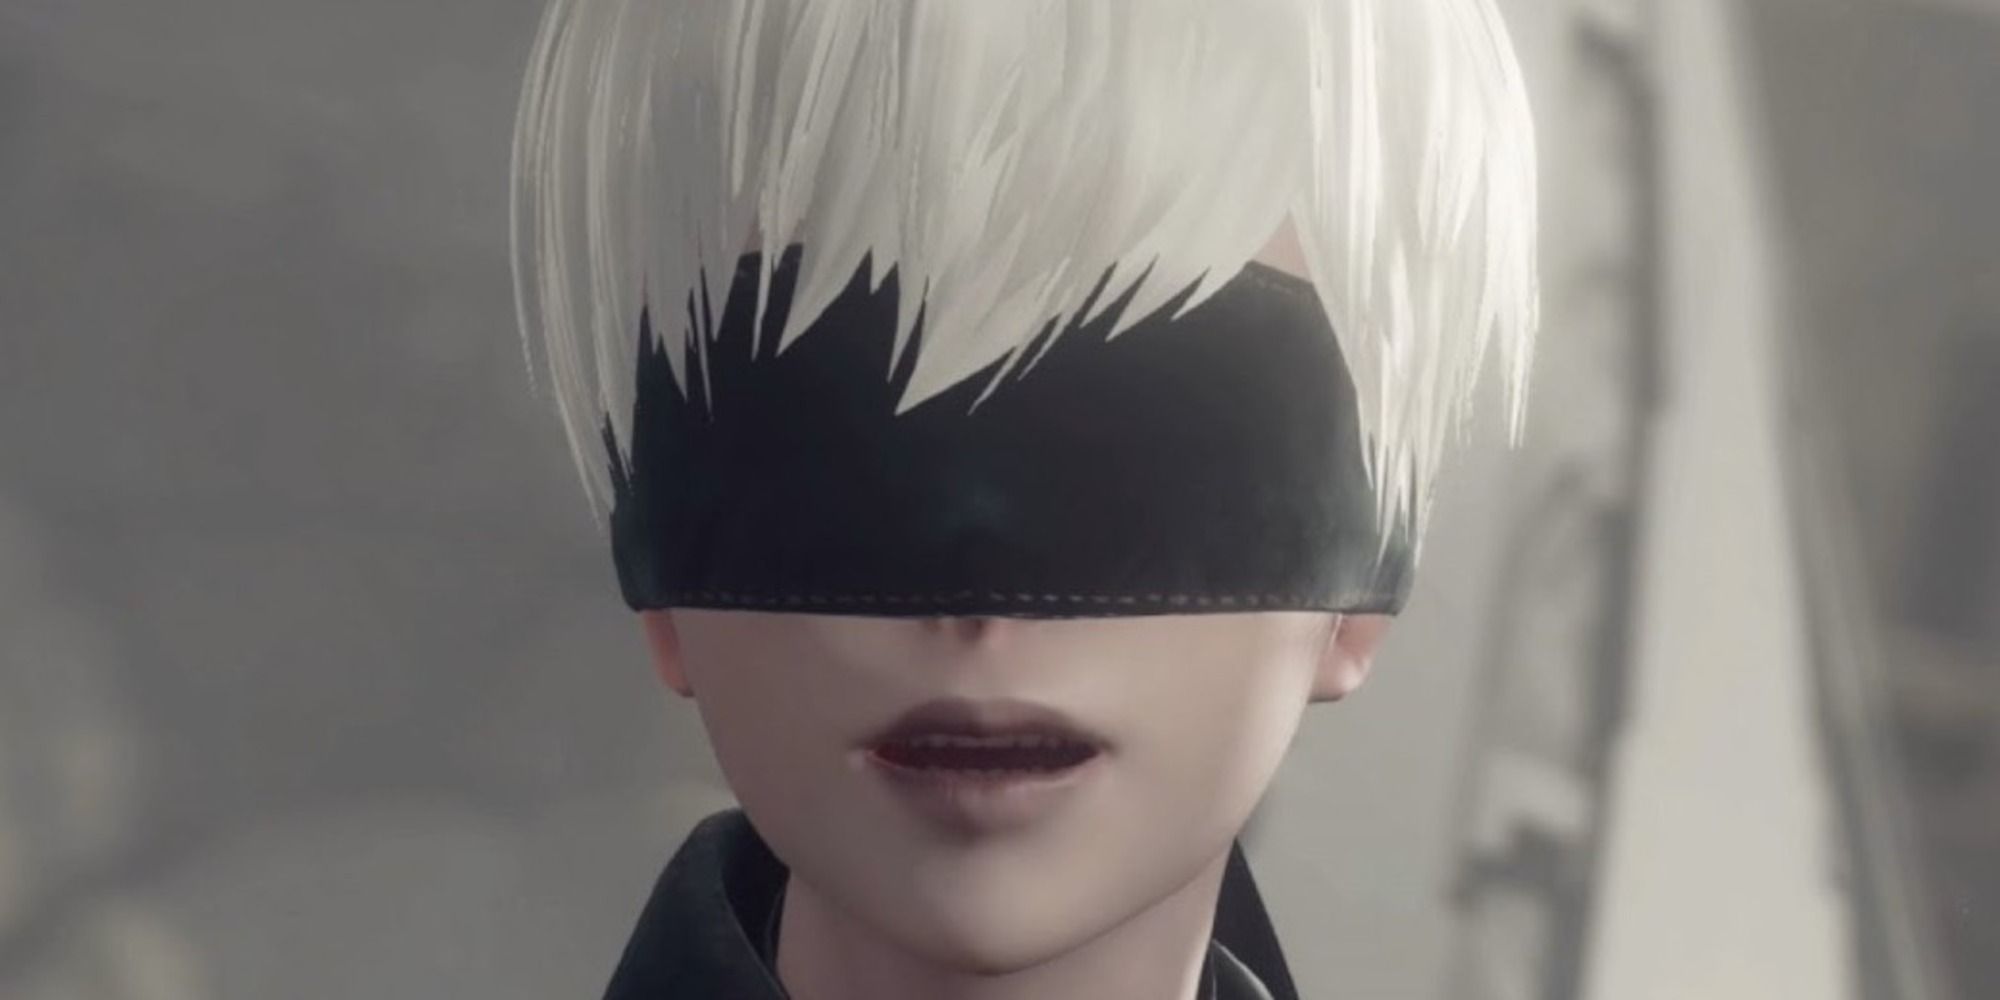 NieR Automata android 9S